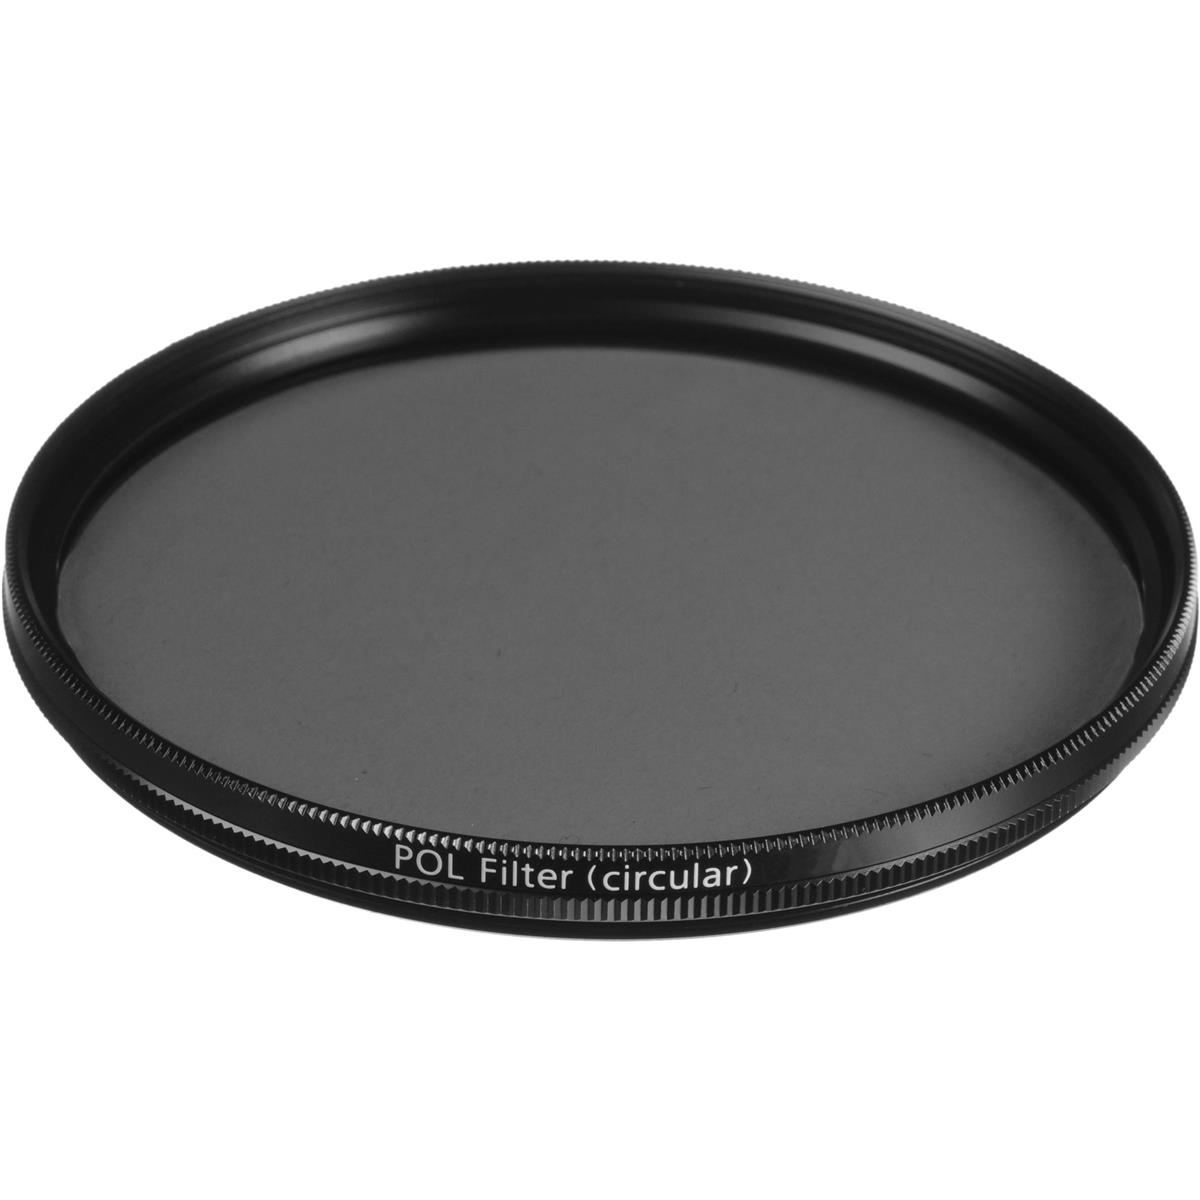 Image of Zeiss 86mm Carl Zeiss T* Circular Polarizer Filter